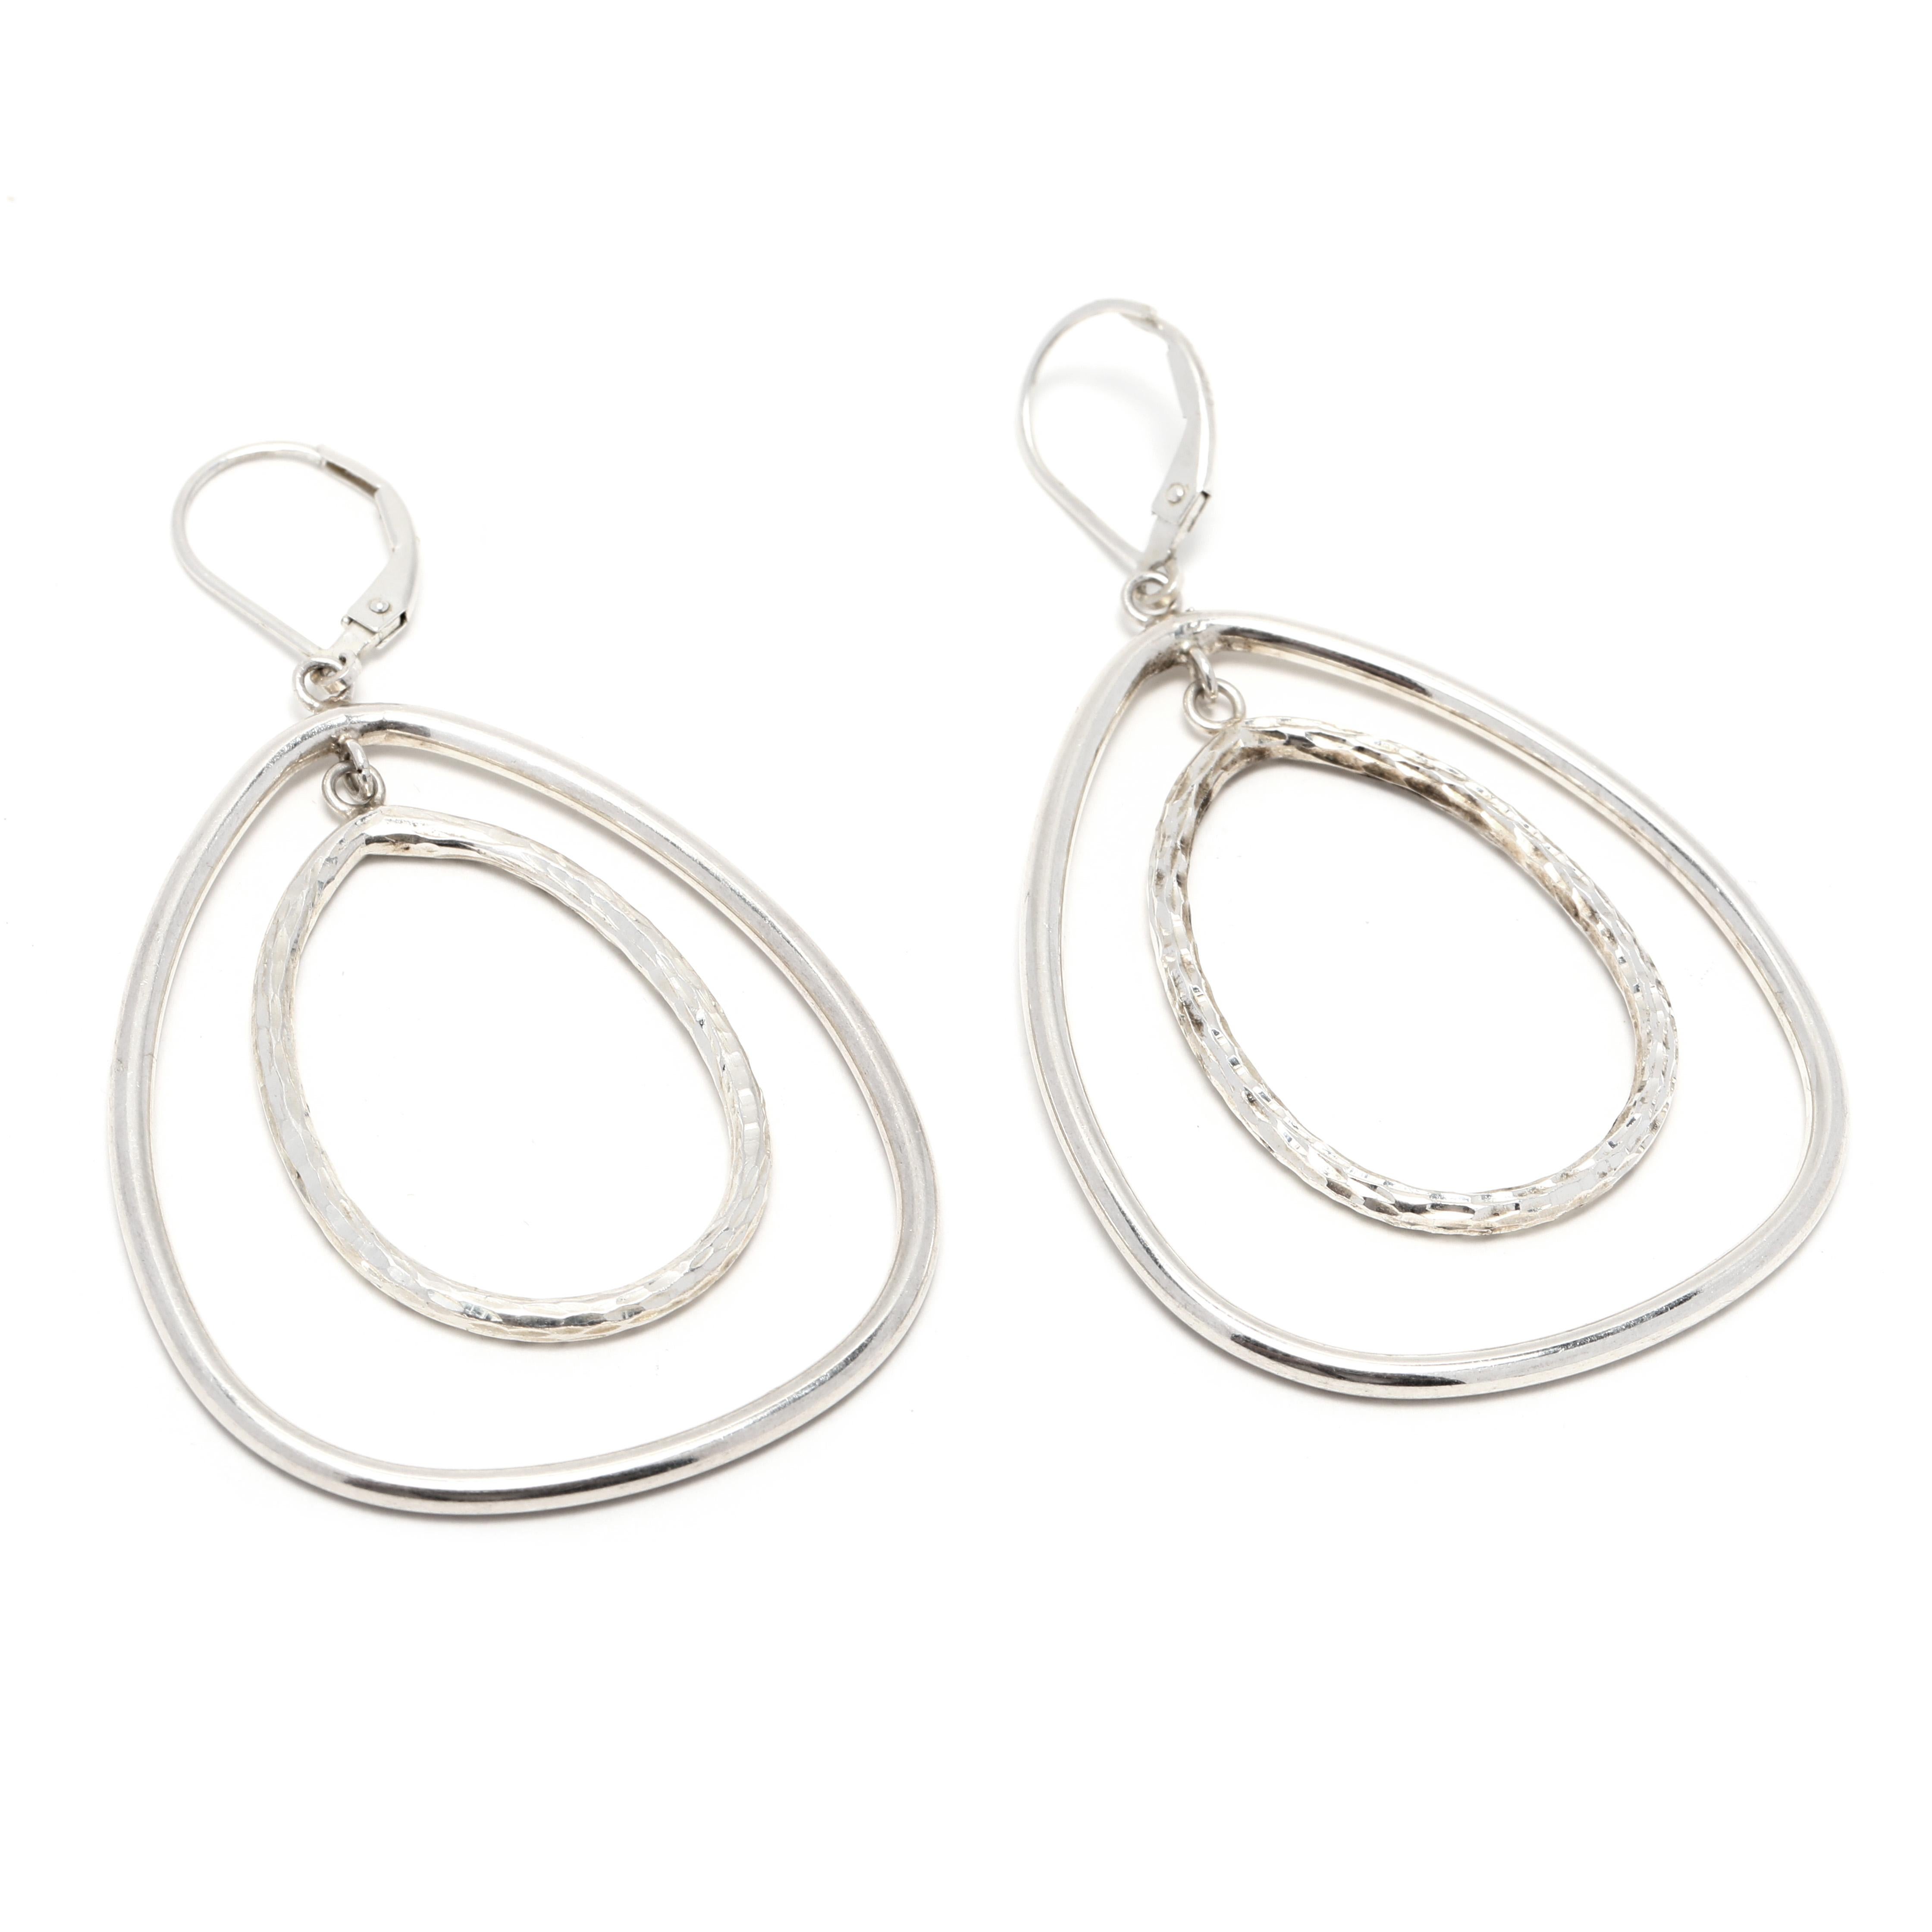 These stunning open teardrop dangle earrings are handcrafted in sterling silver for a light and comfortable fit. At 2 3/8 inch, these earrings are perfect for everyday wear. The polished silver finish will add a touch of elegance to any outfit.